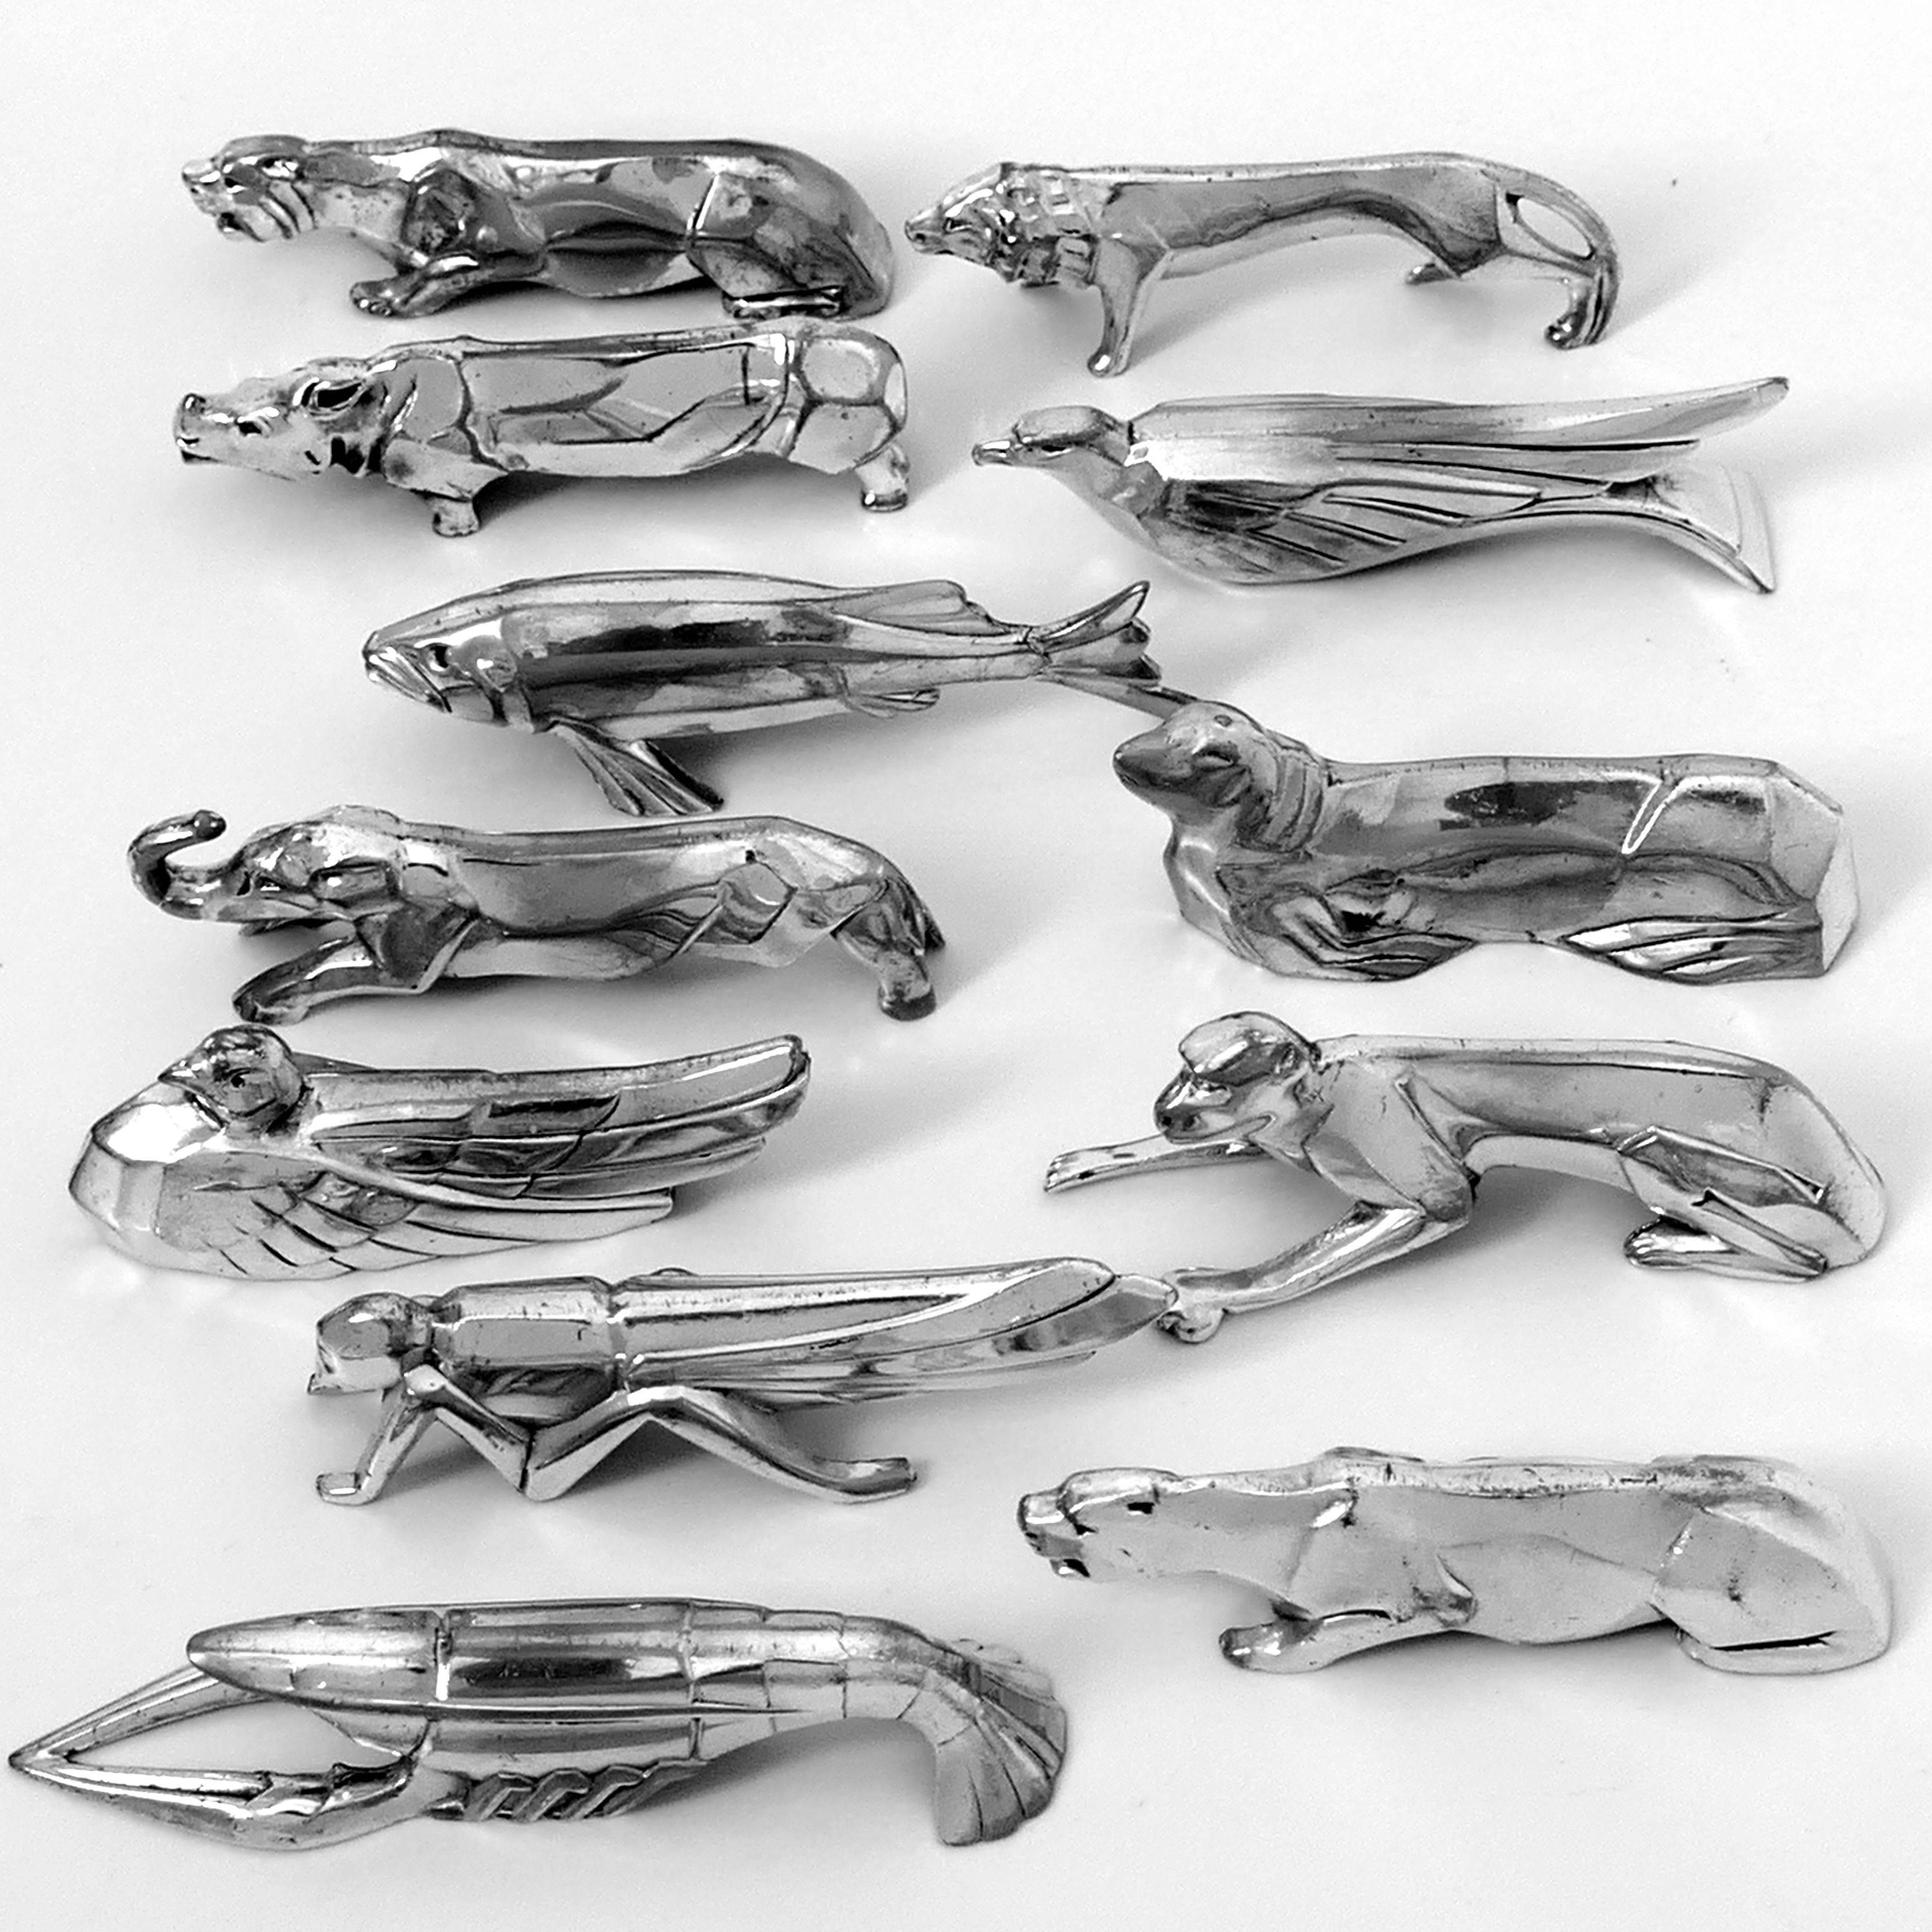 Rare set of twelve chrome plated metal knife-rests in the shape of different animals: lobster, lion, grasshopper, elephant, hippopotamus, monkey, eagle, fish, sea lion, puma (2) and duck, circa 1920-1930. 

The knife rests feature the characteristic